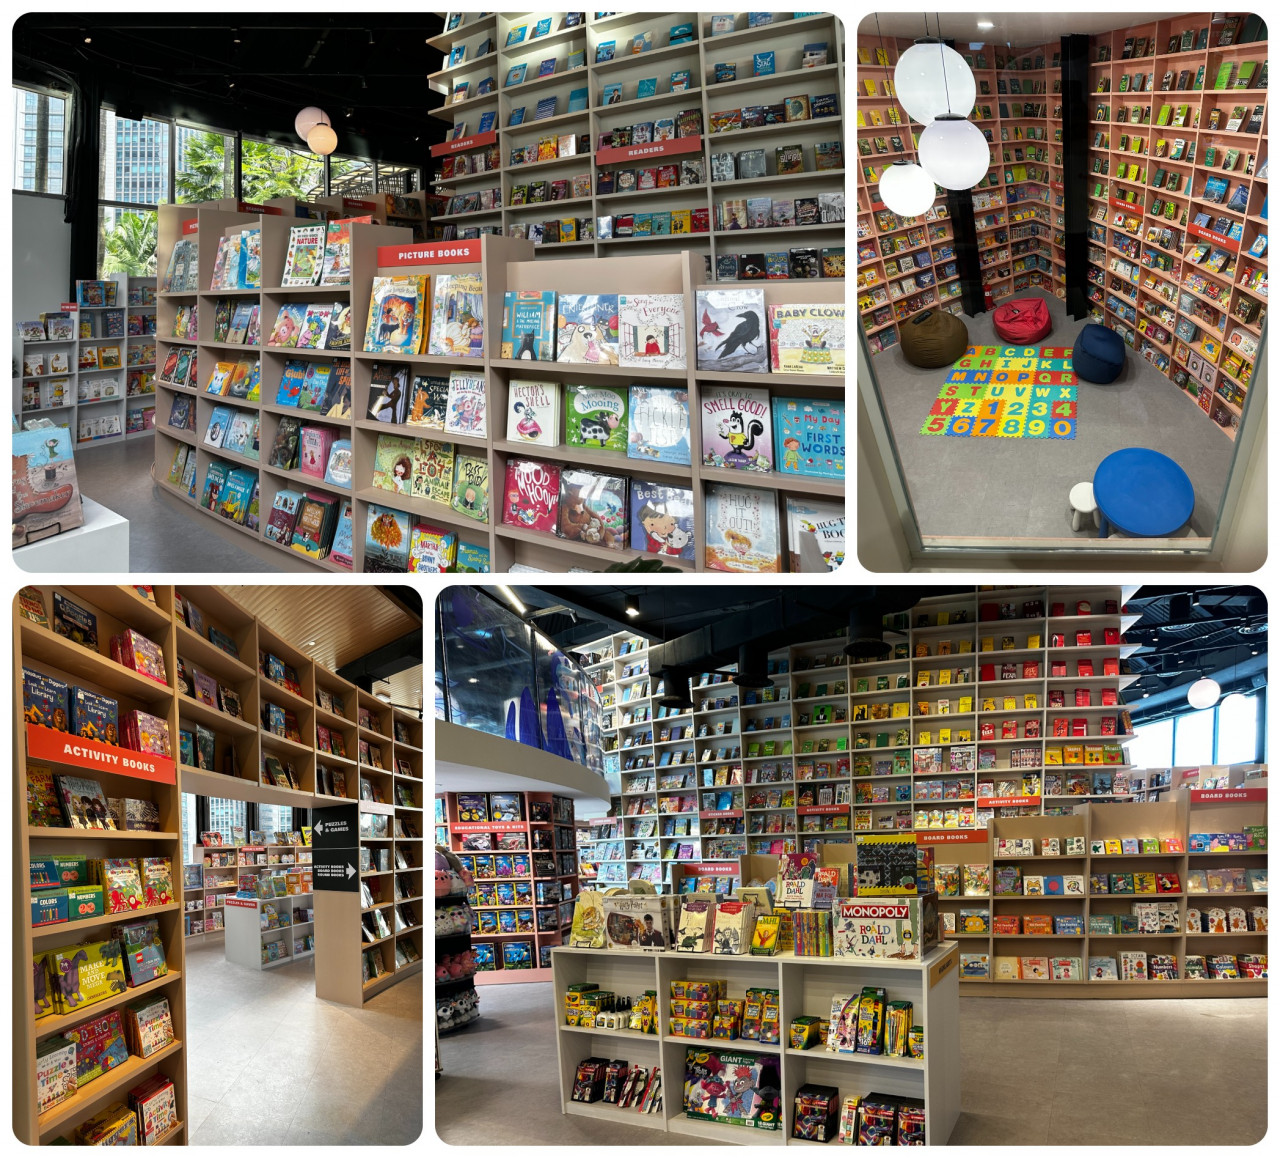 Snapshots of the kid’s section of the bookstore. – Haikal Fernandez pic